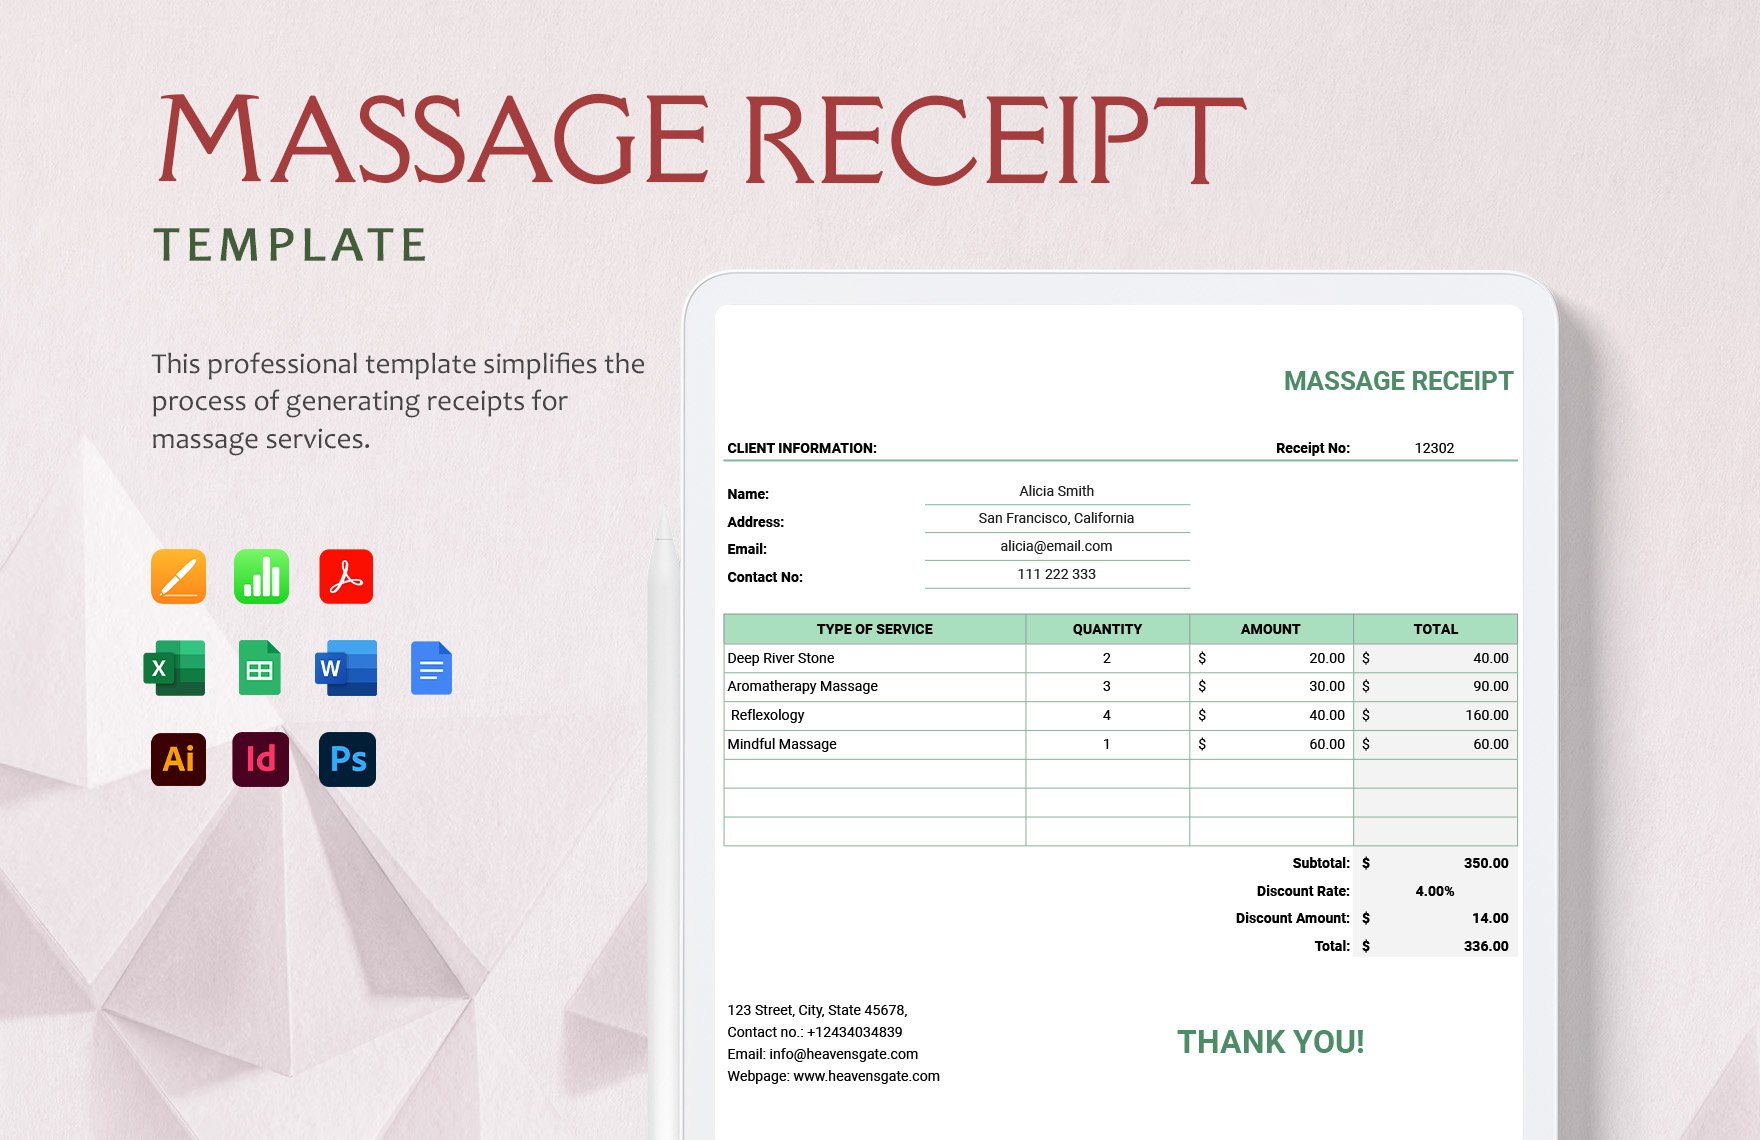 Free Massage Receipt Template in Word, Google Docs, Excel, Google Sheets, Illustrator, PSD, Apple Pages, Publisher, InDesign, Apple Numbers